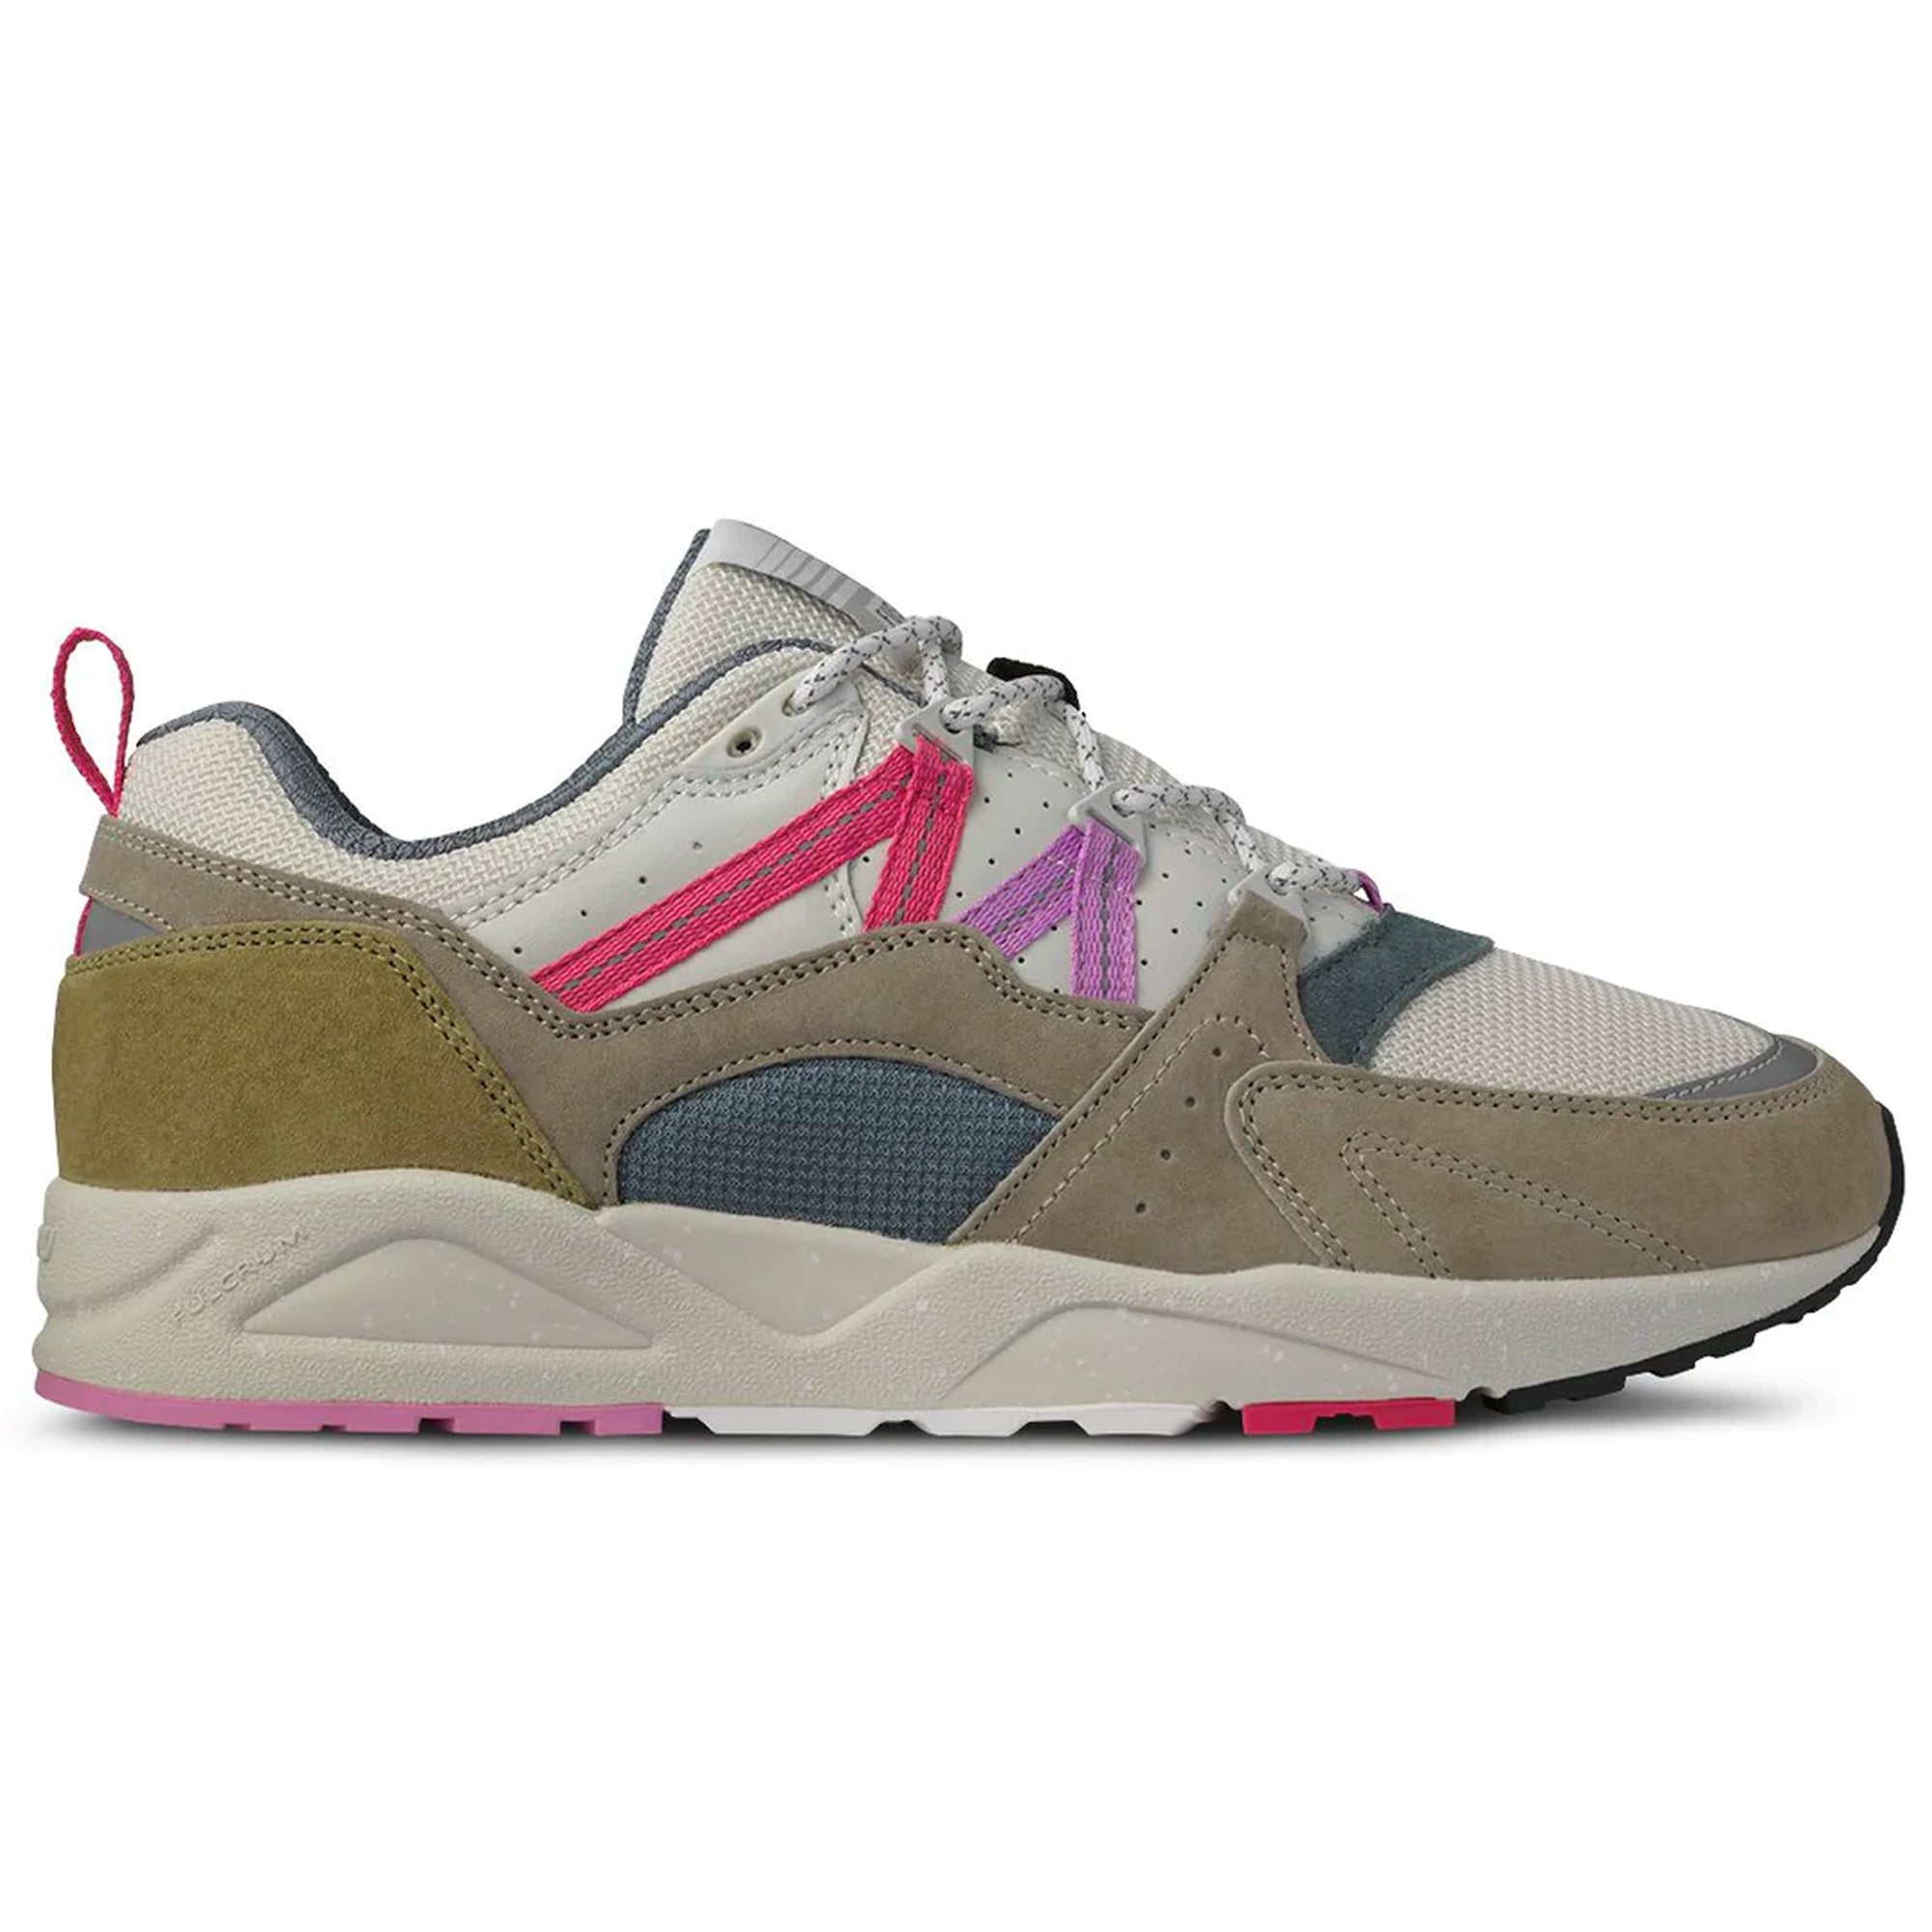 Karhu Fusion 2.0 Trainers 'The Forest Rules Pack' - Abbey Stone / Pink Yarrow